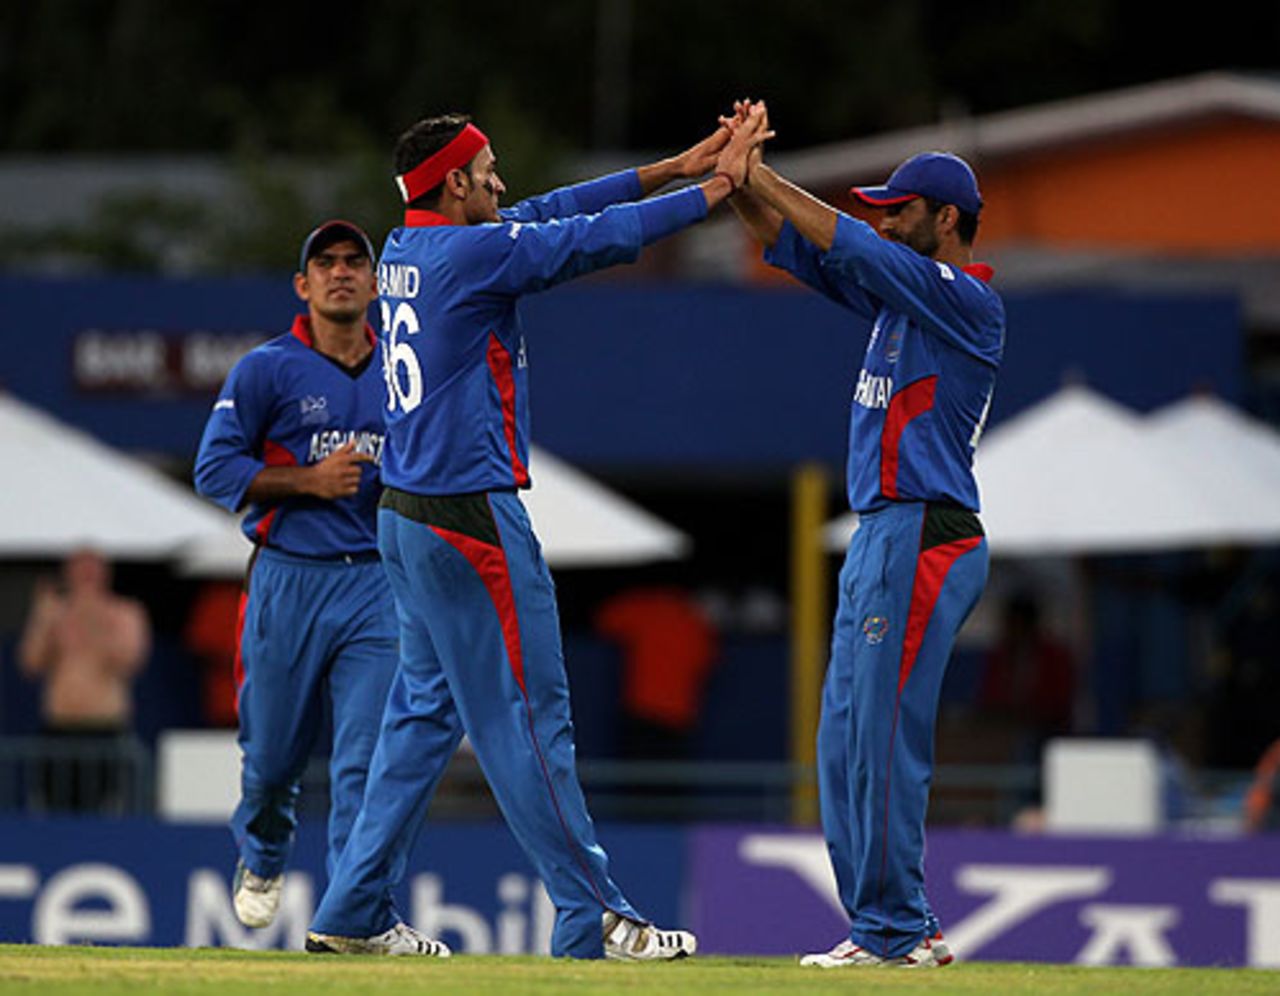 Hamid Hassan took three wickets in a fiery four-over spell, Afghanistan v South Africa, ICC World Twenty20, Bridgetown, May 5, 2010